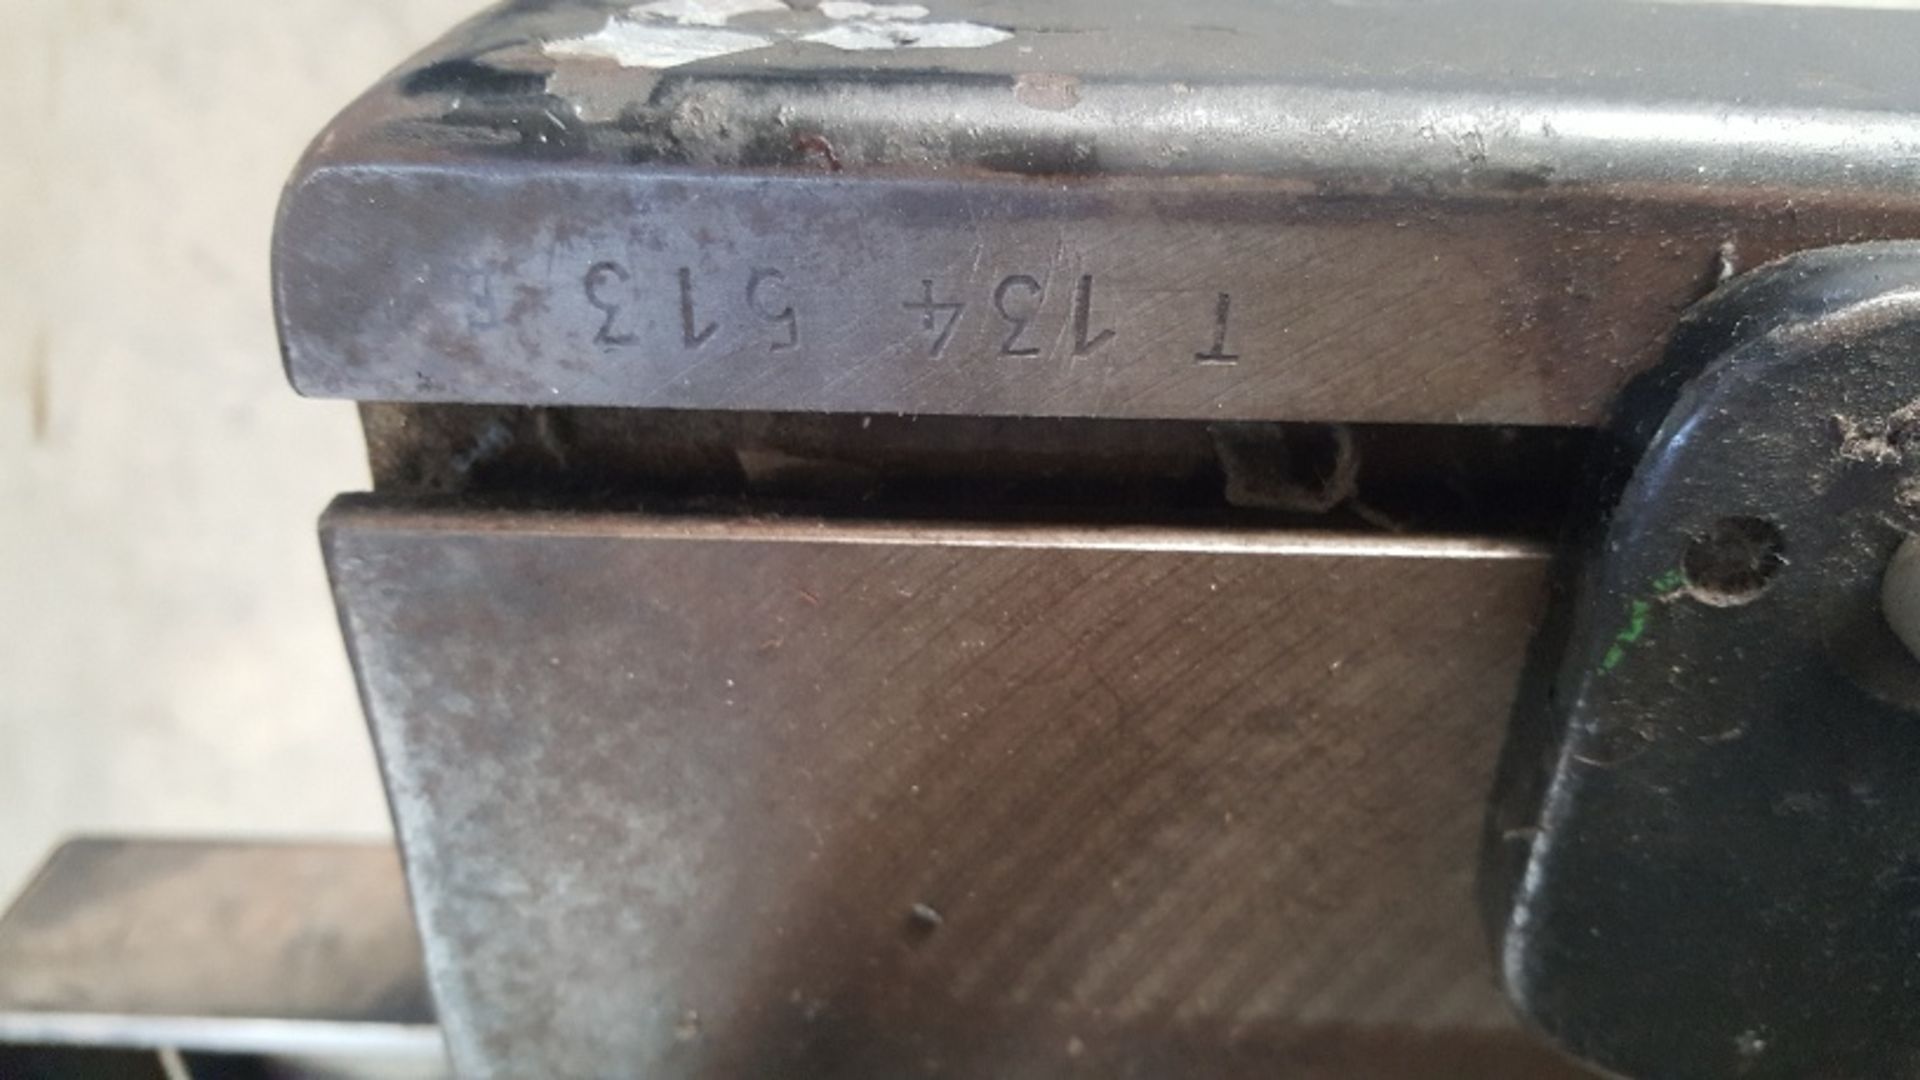 Heidelberg T PLATEN PRESS, serial no. T134513E, year of manufacture 1961, red handle model with lock - Image 3 of 3